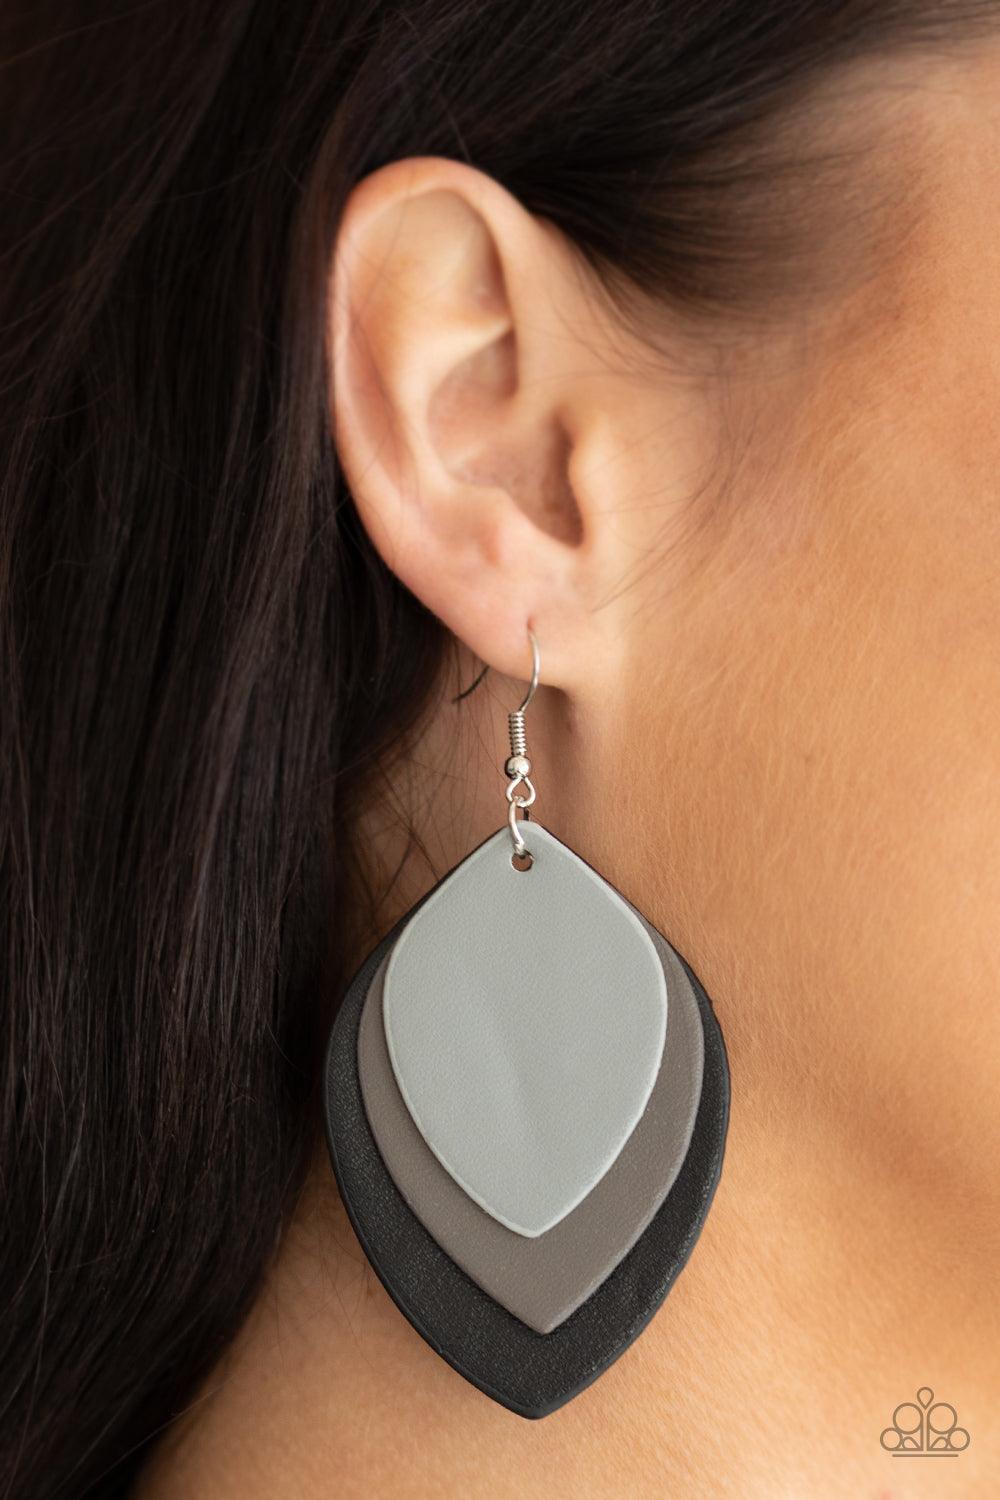 Paparazzi Accessories Light as a LEATHER - Black Leafy Ultimate Gray, gray, and black leather frames delicately layer into a seasonal lure. Earring attaches to a standard fishhook fitting. Sold as one pair of earrings. Jewelry